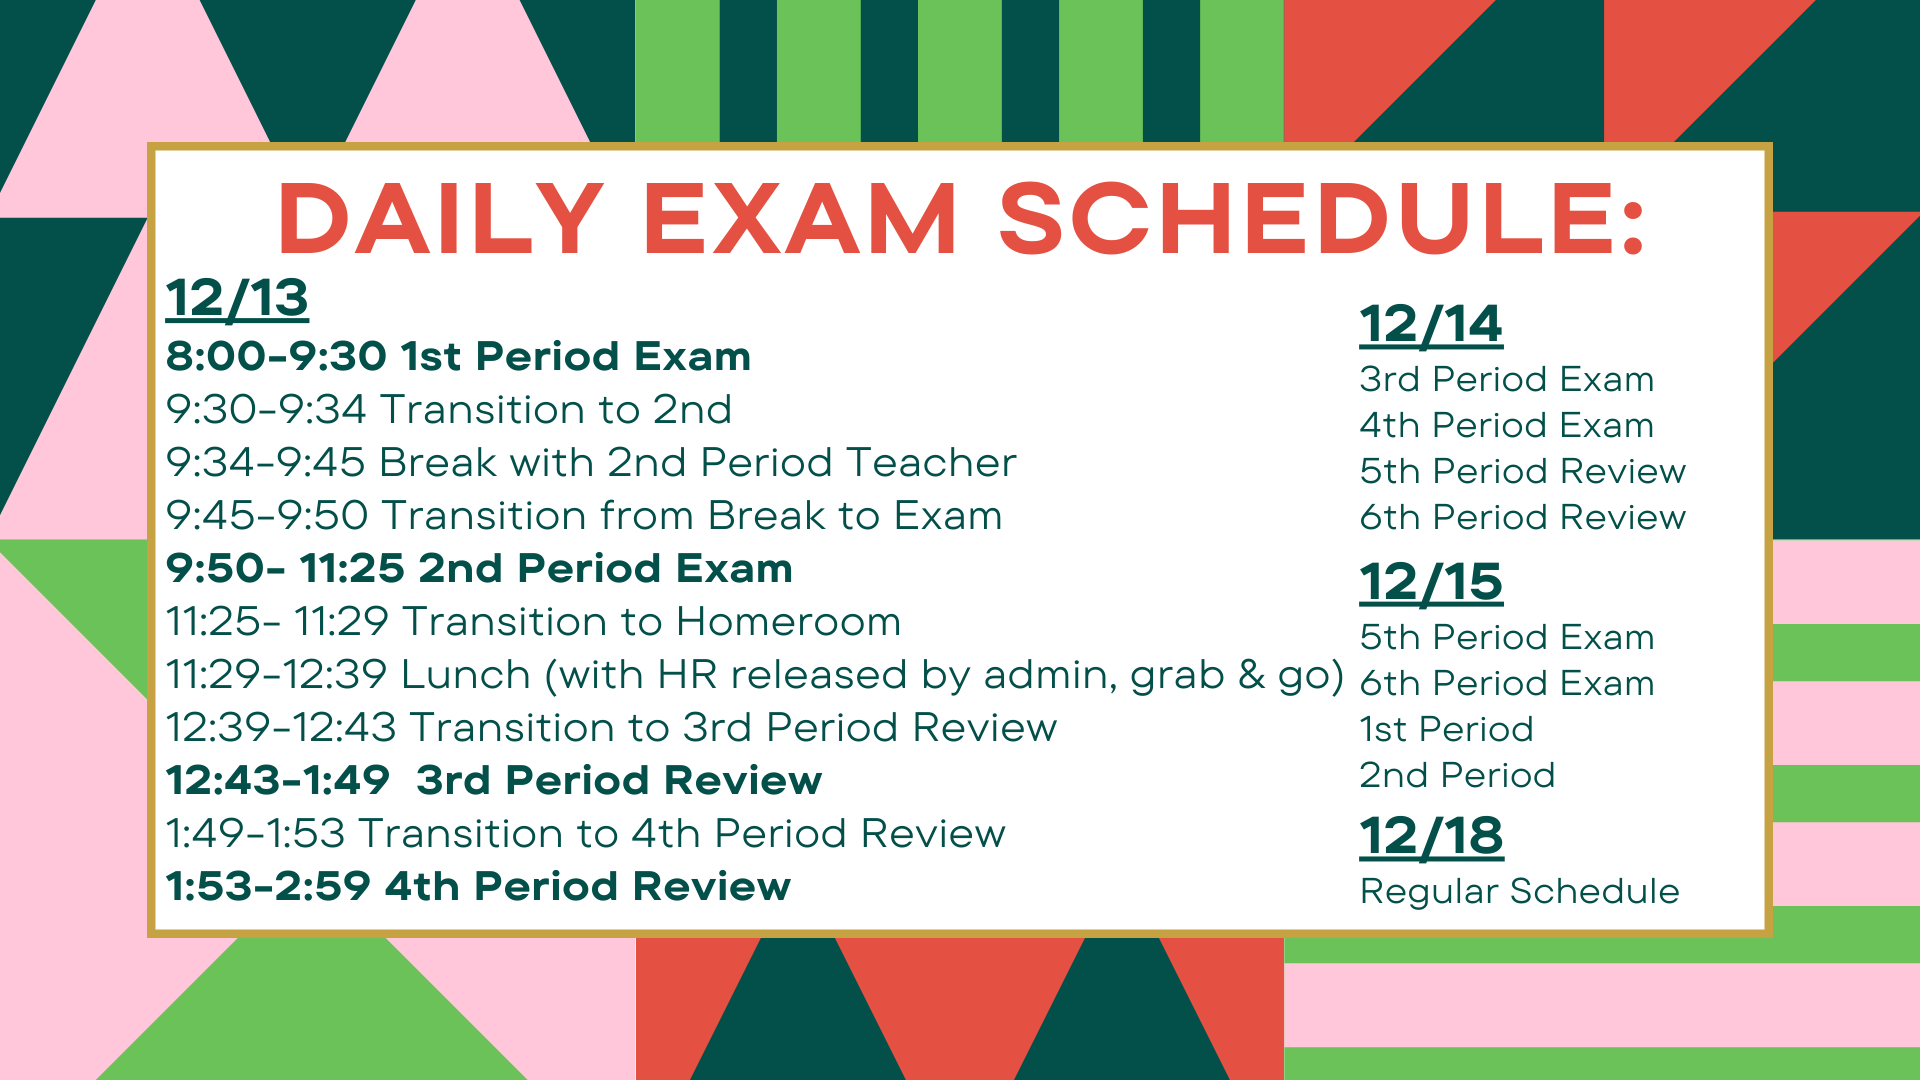 Daily exam schedule: 12/13 8:00-9:30 1st Period Exam 9:30-9:34 Transition to 2nd 9:34-9:45 Break with 2nd Period Teacher 9:45-9:50 Transition from Break to Exam 9:50- 11:25 2nd Period Exam 11:25- 11:29 Transition to Homeroom 11:29-12:39 Lunch (with HR released by admin, grab & go) 12:39-12:43 Transition to 3rd Period Review 12:43-1:49  3rd Period Review 1:49-1:53 Transition to 4th Period Review 1:53-2:59 4th Period Review12/14 3rd Period Exam 4th Period Exam 5th Period Review 6th Period Review